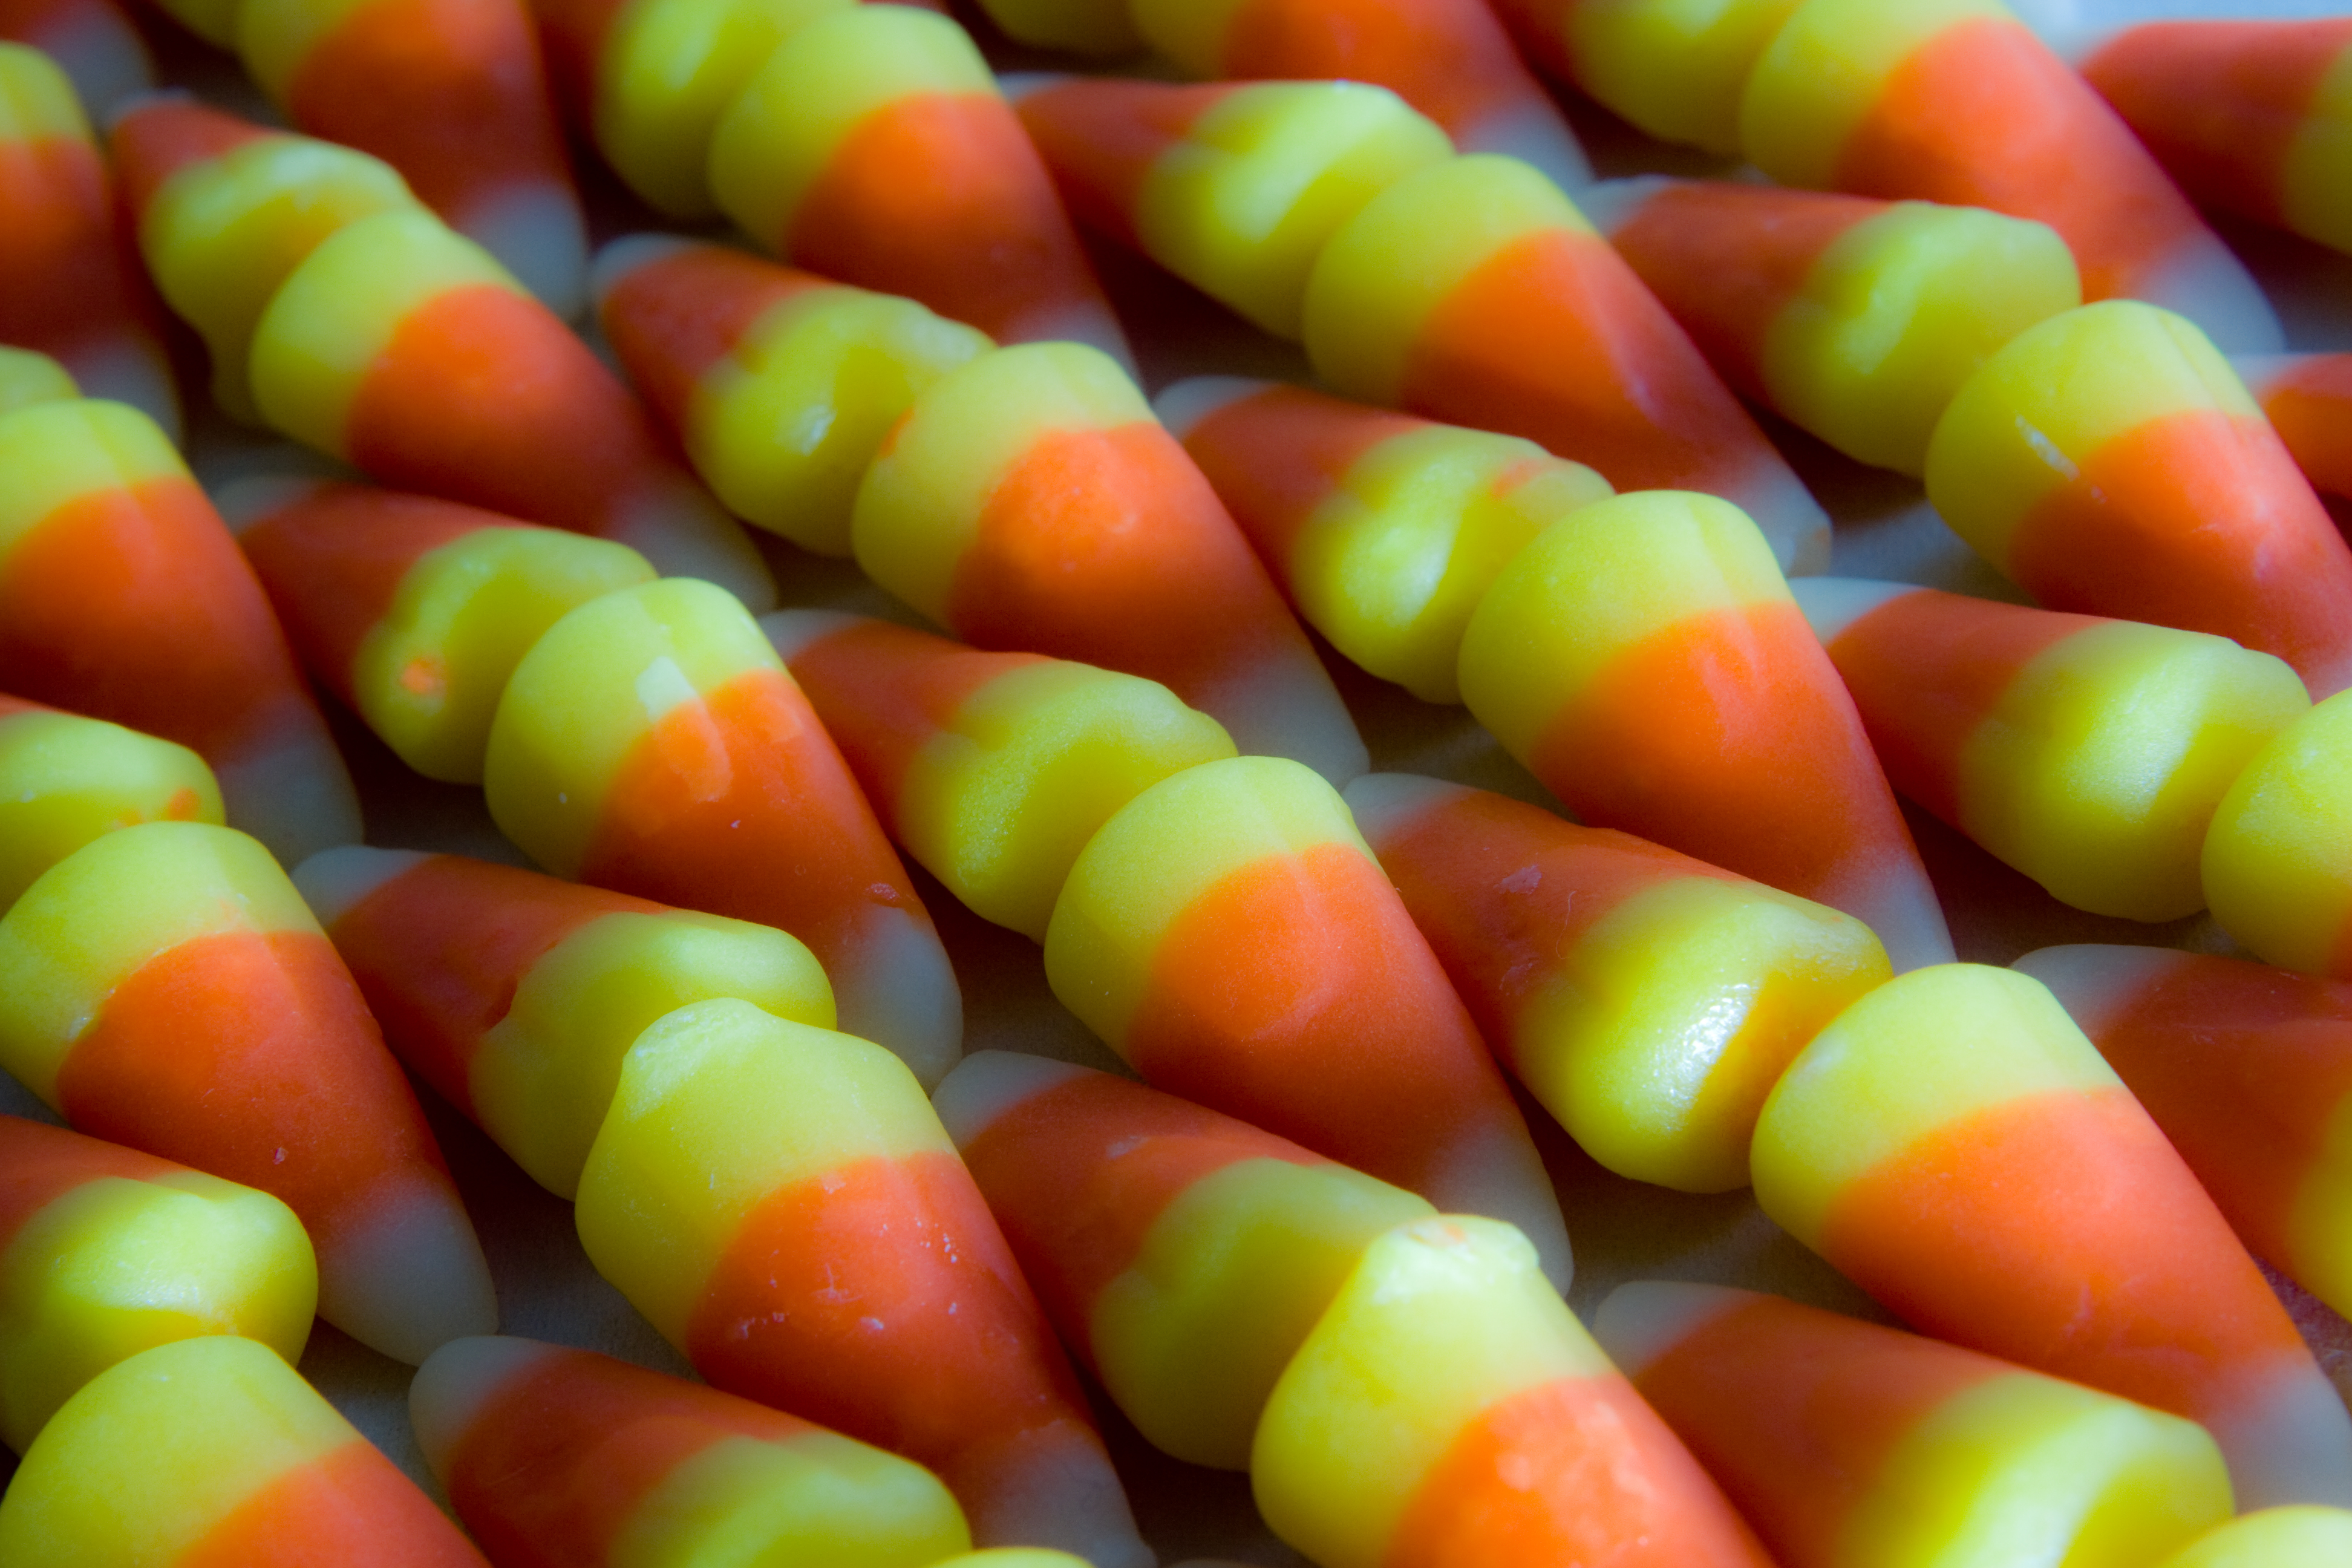 Commons:A. Aligned candy corn (2995102725).jpg. 